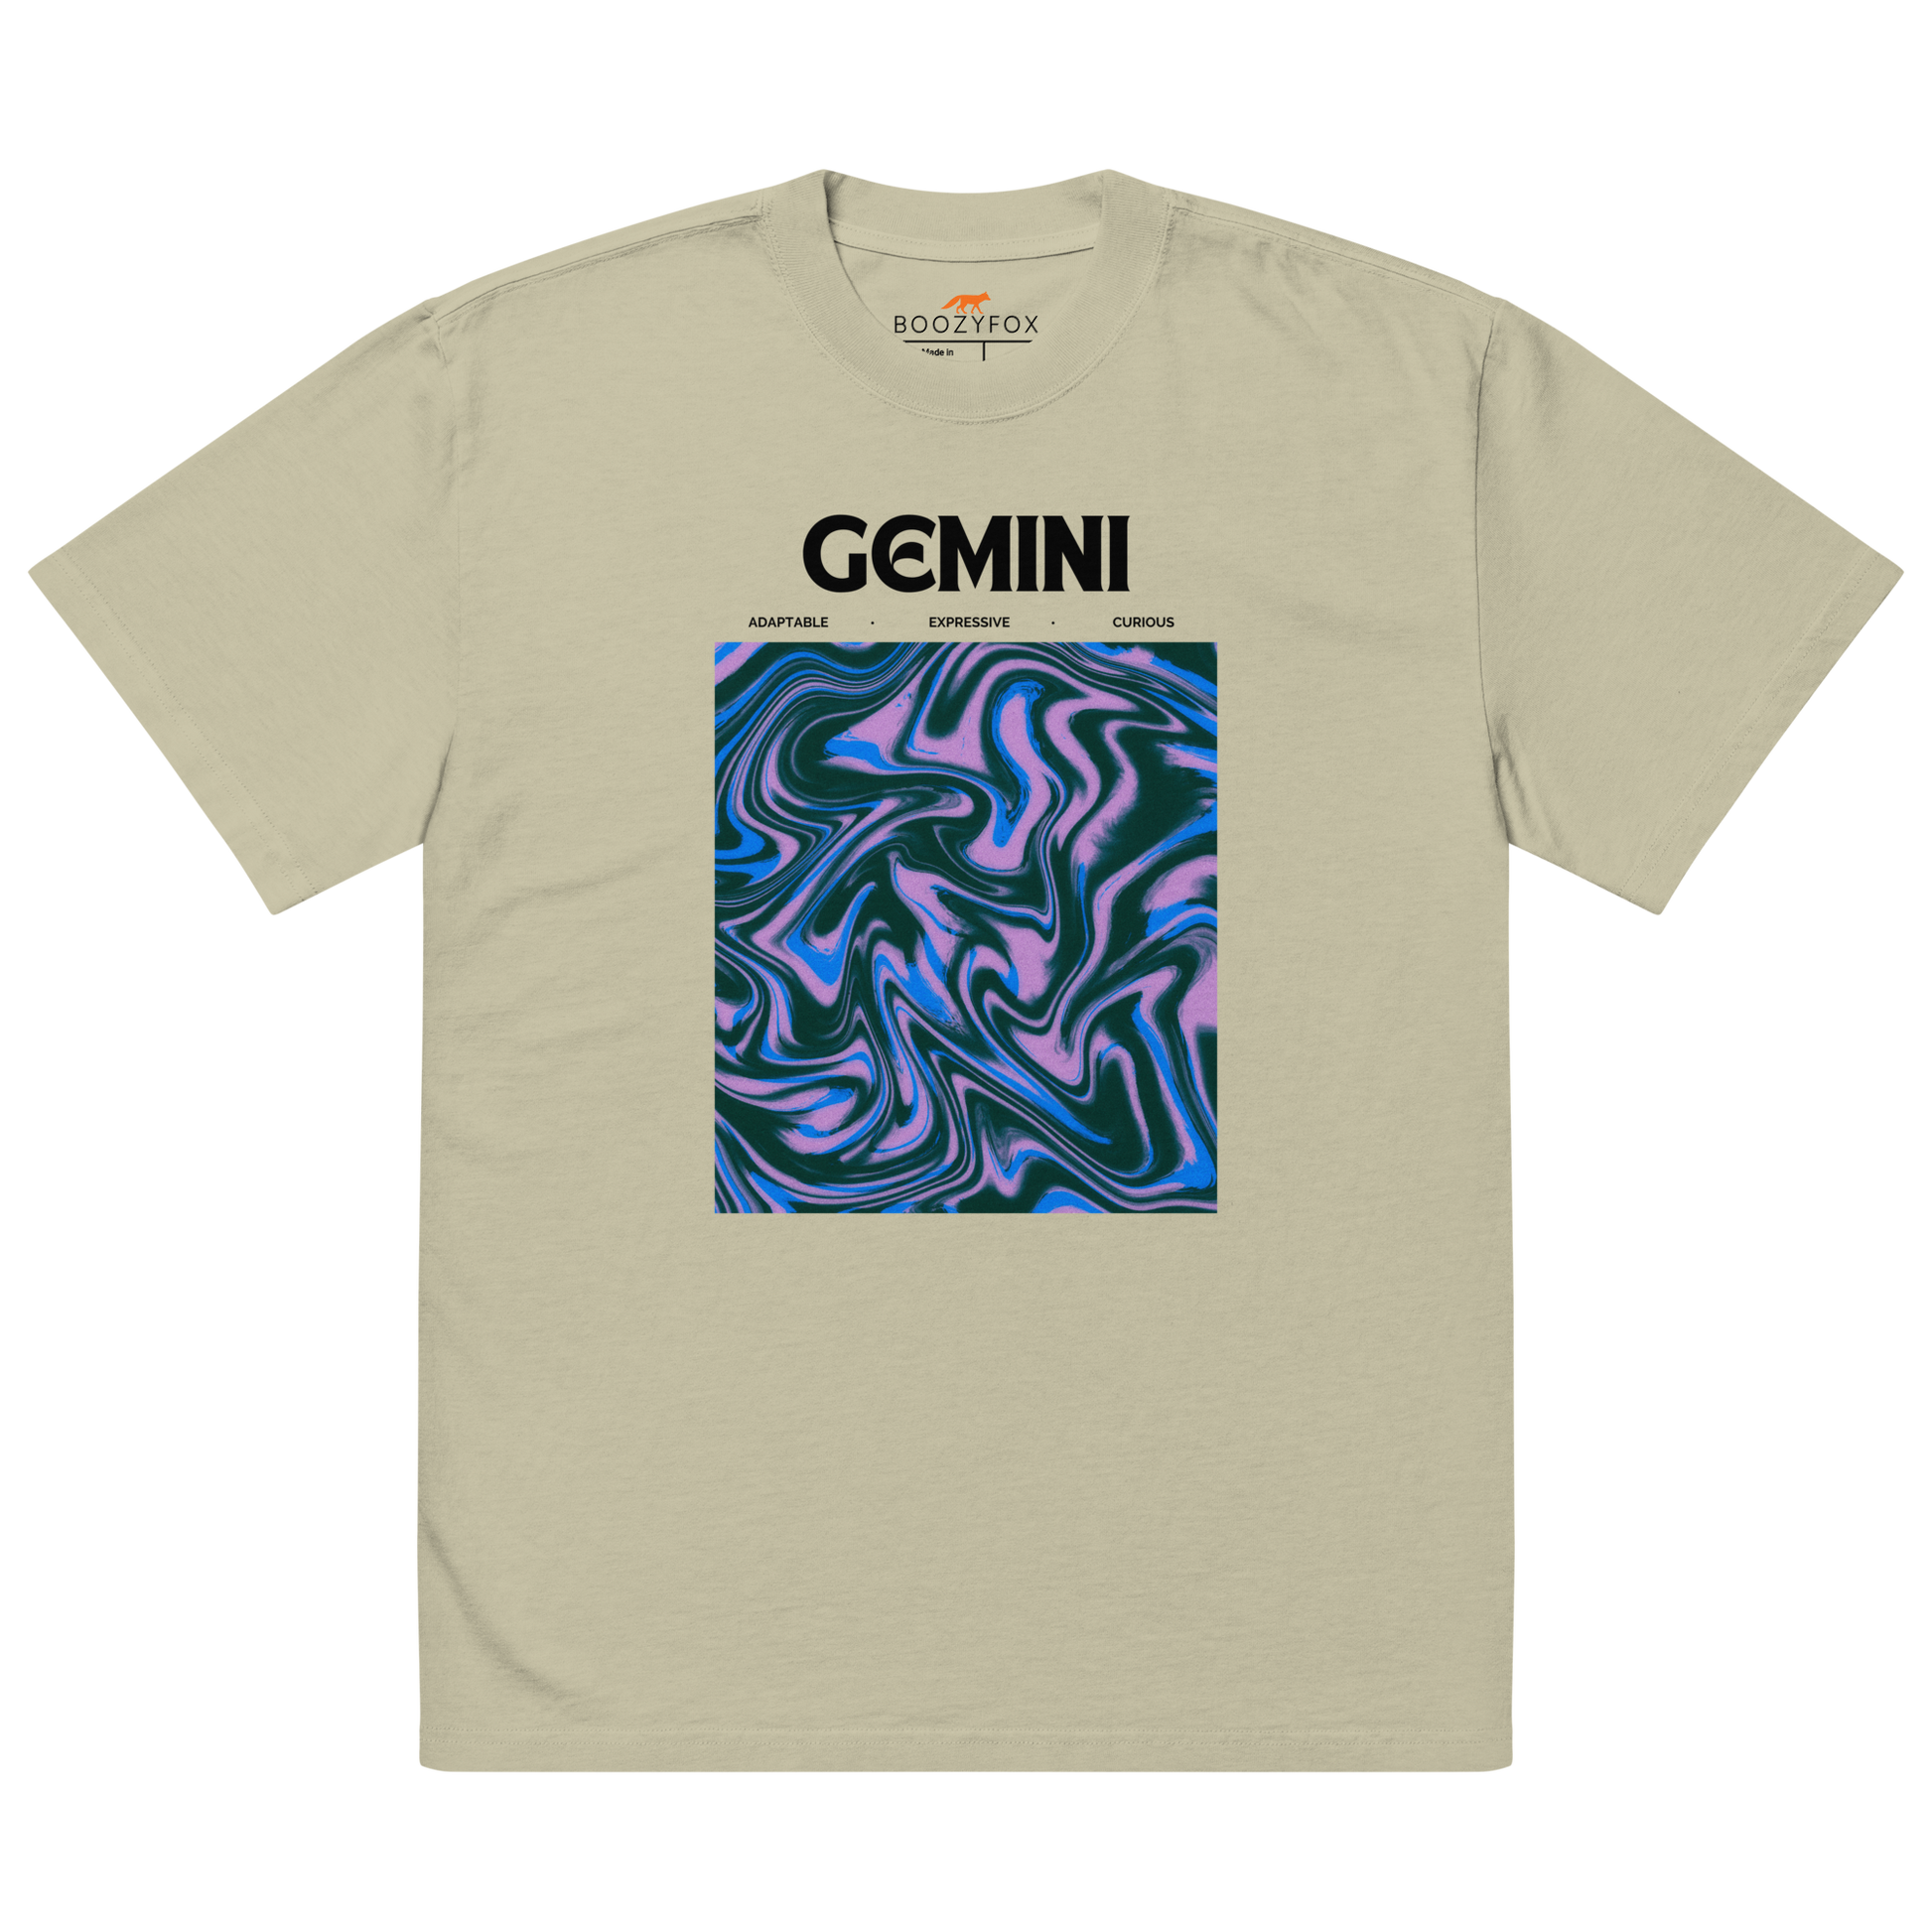 Faded Eucalyptus Gemini Oversized T-Shirt featuring an Abstract Gemini Star Sign graphic on the chest - Cool Graphic Zodiac Oversized Tees - Boozy Fox